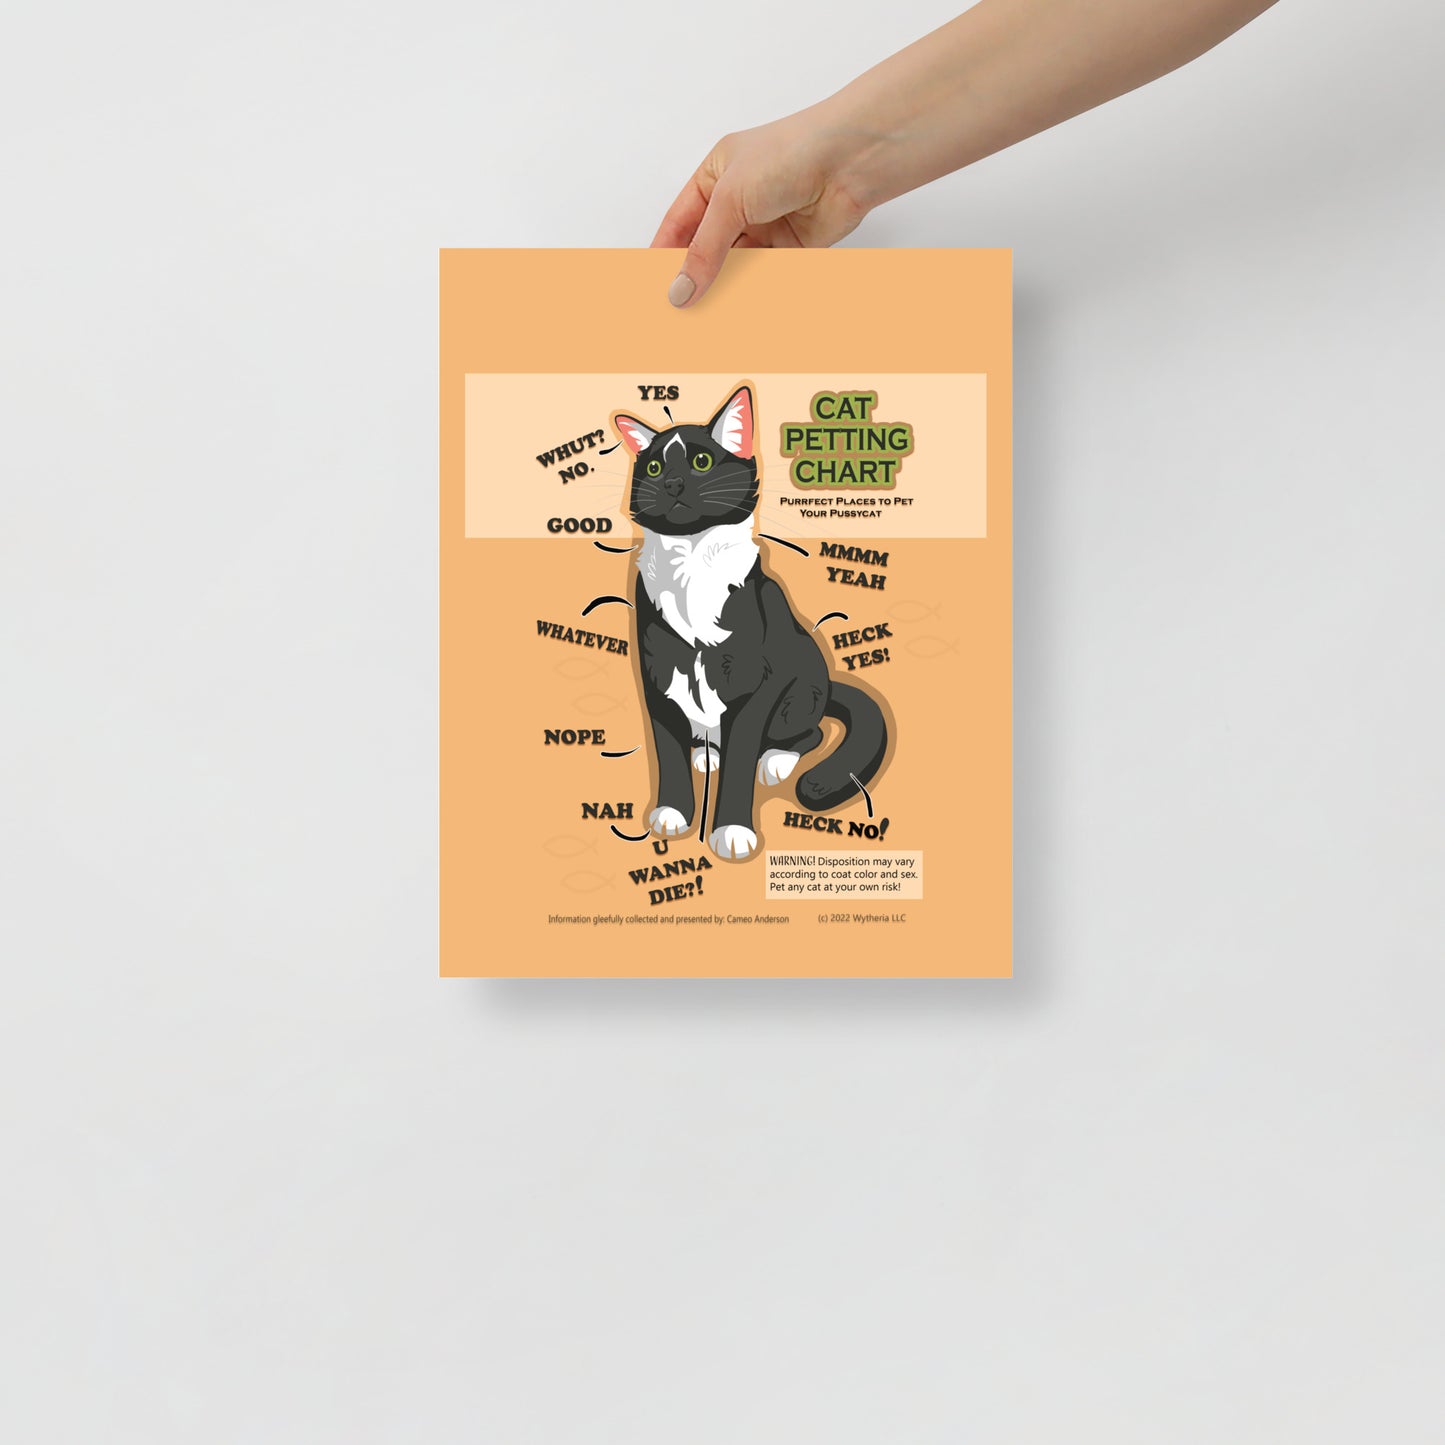 Funny Cat Petting Chart Meme Breed Poster - Cameo Anderson